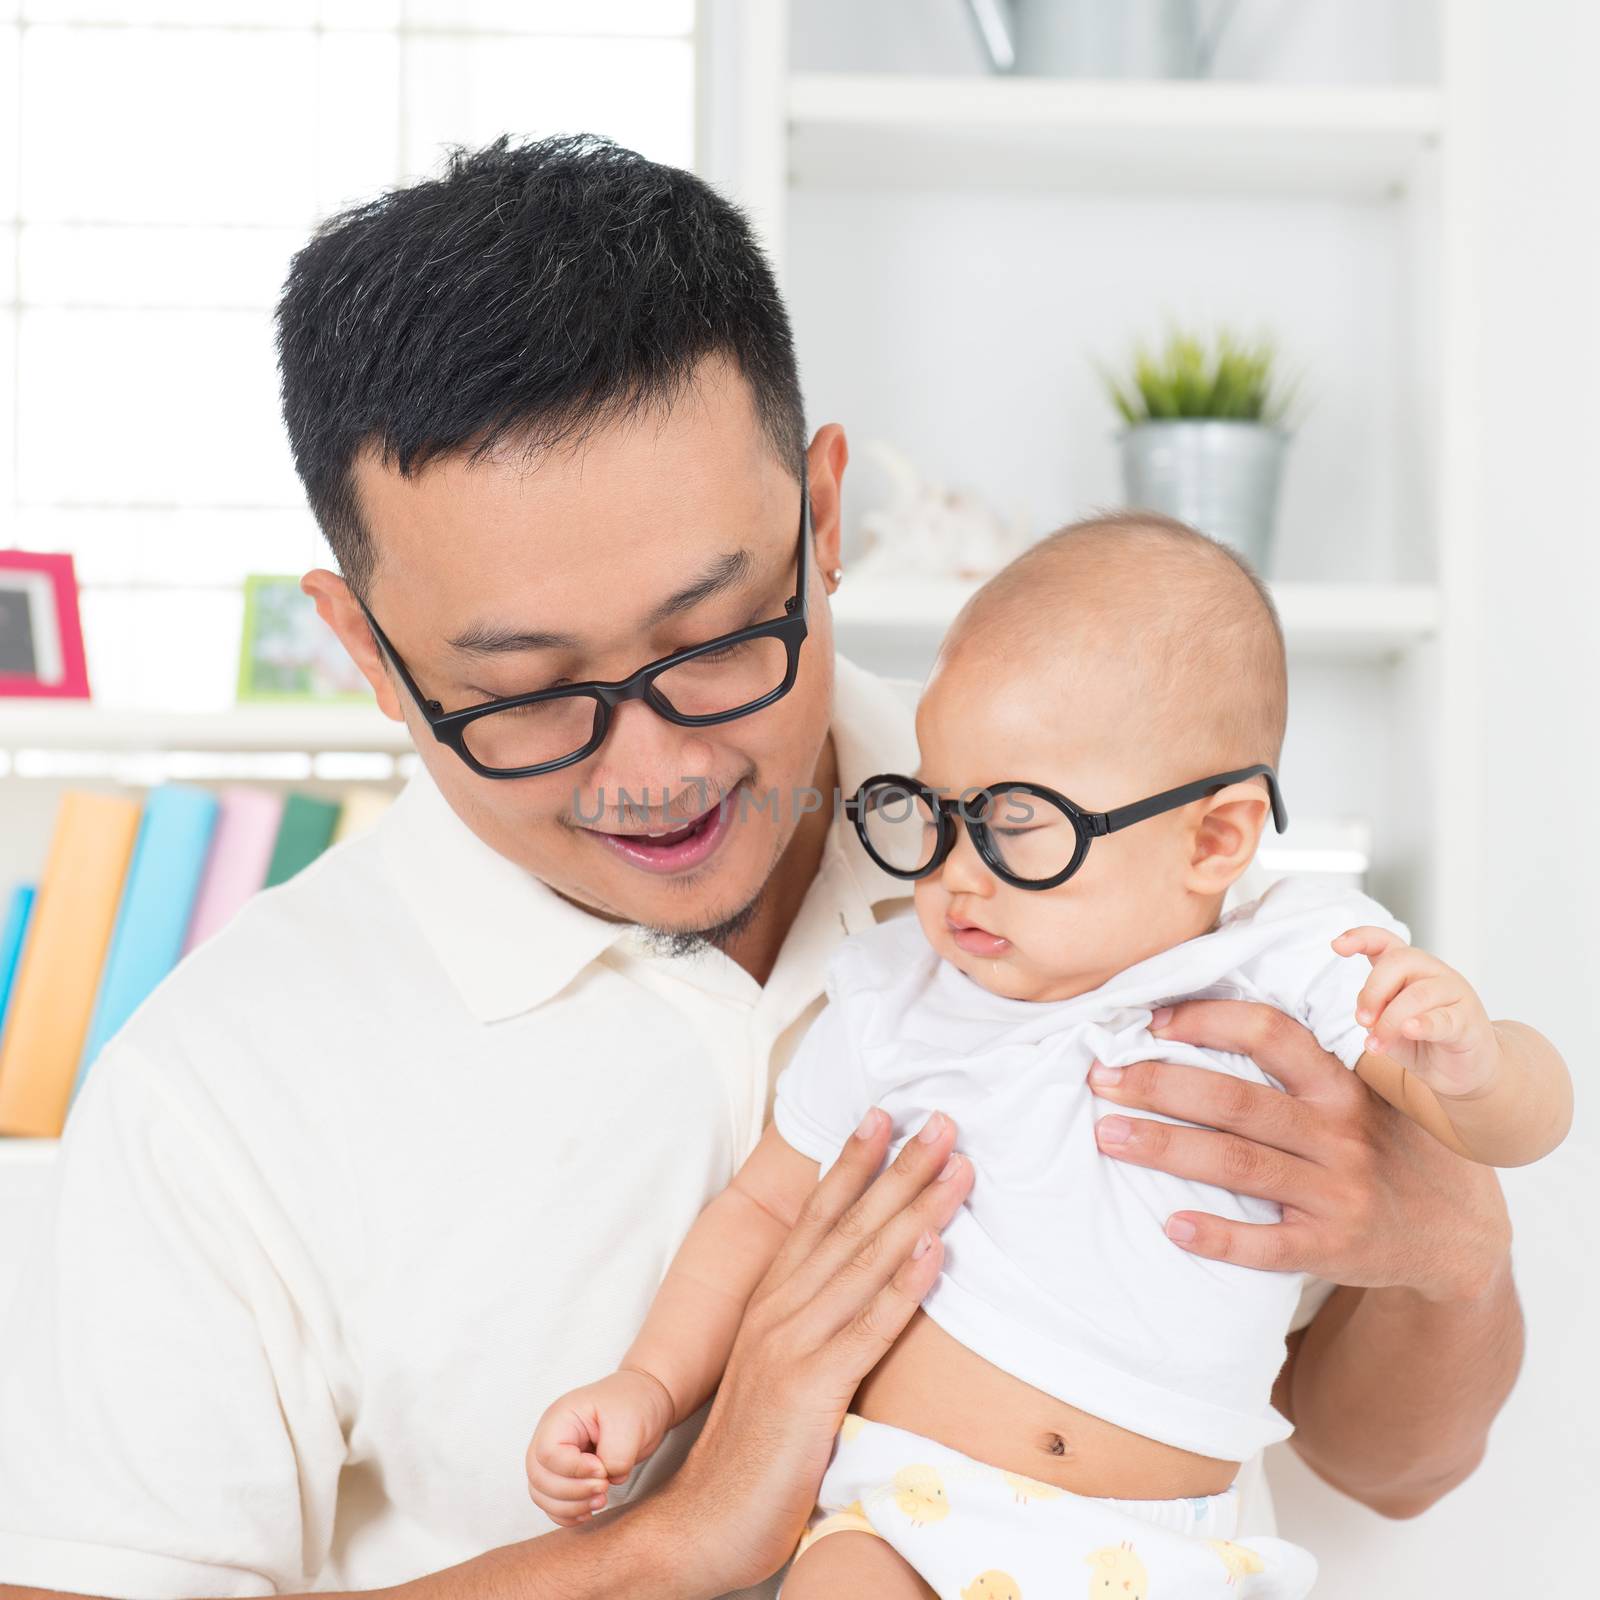 Young father and child with nerd glasses. Asian family at home.